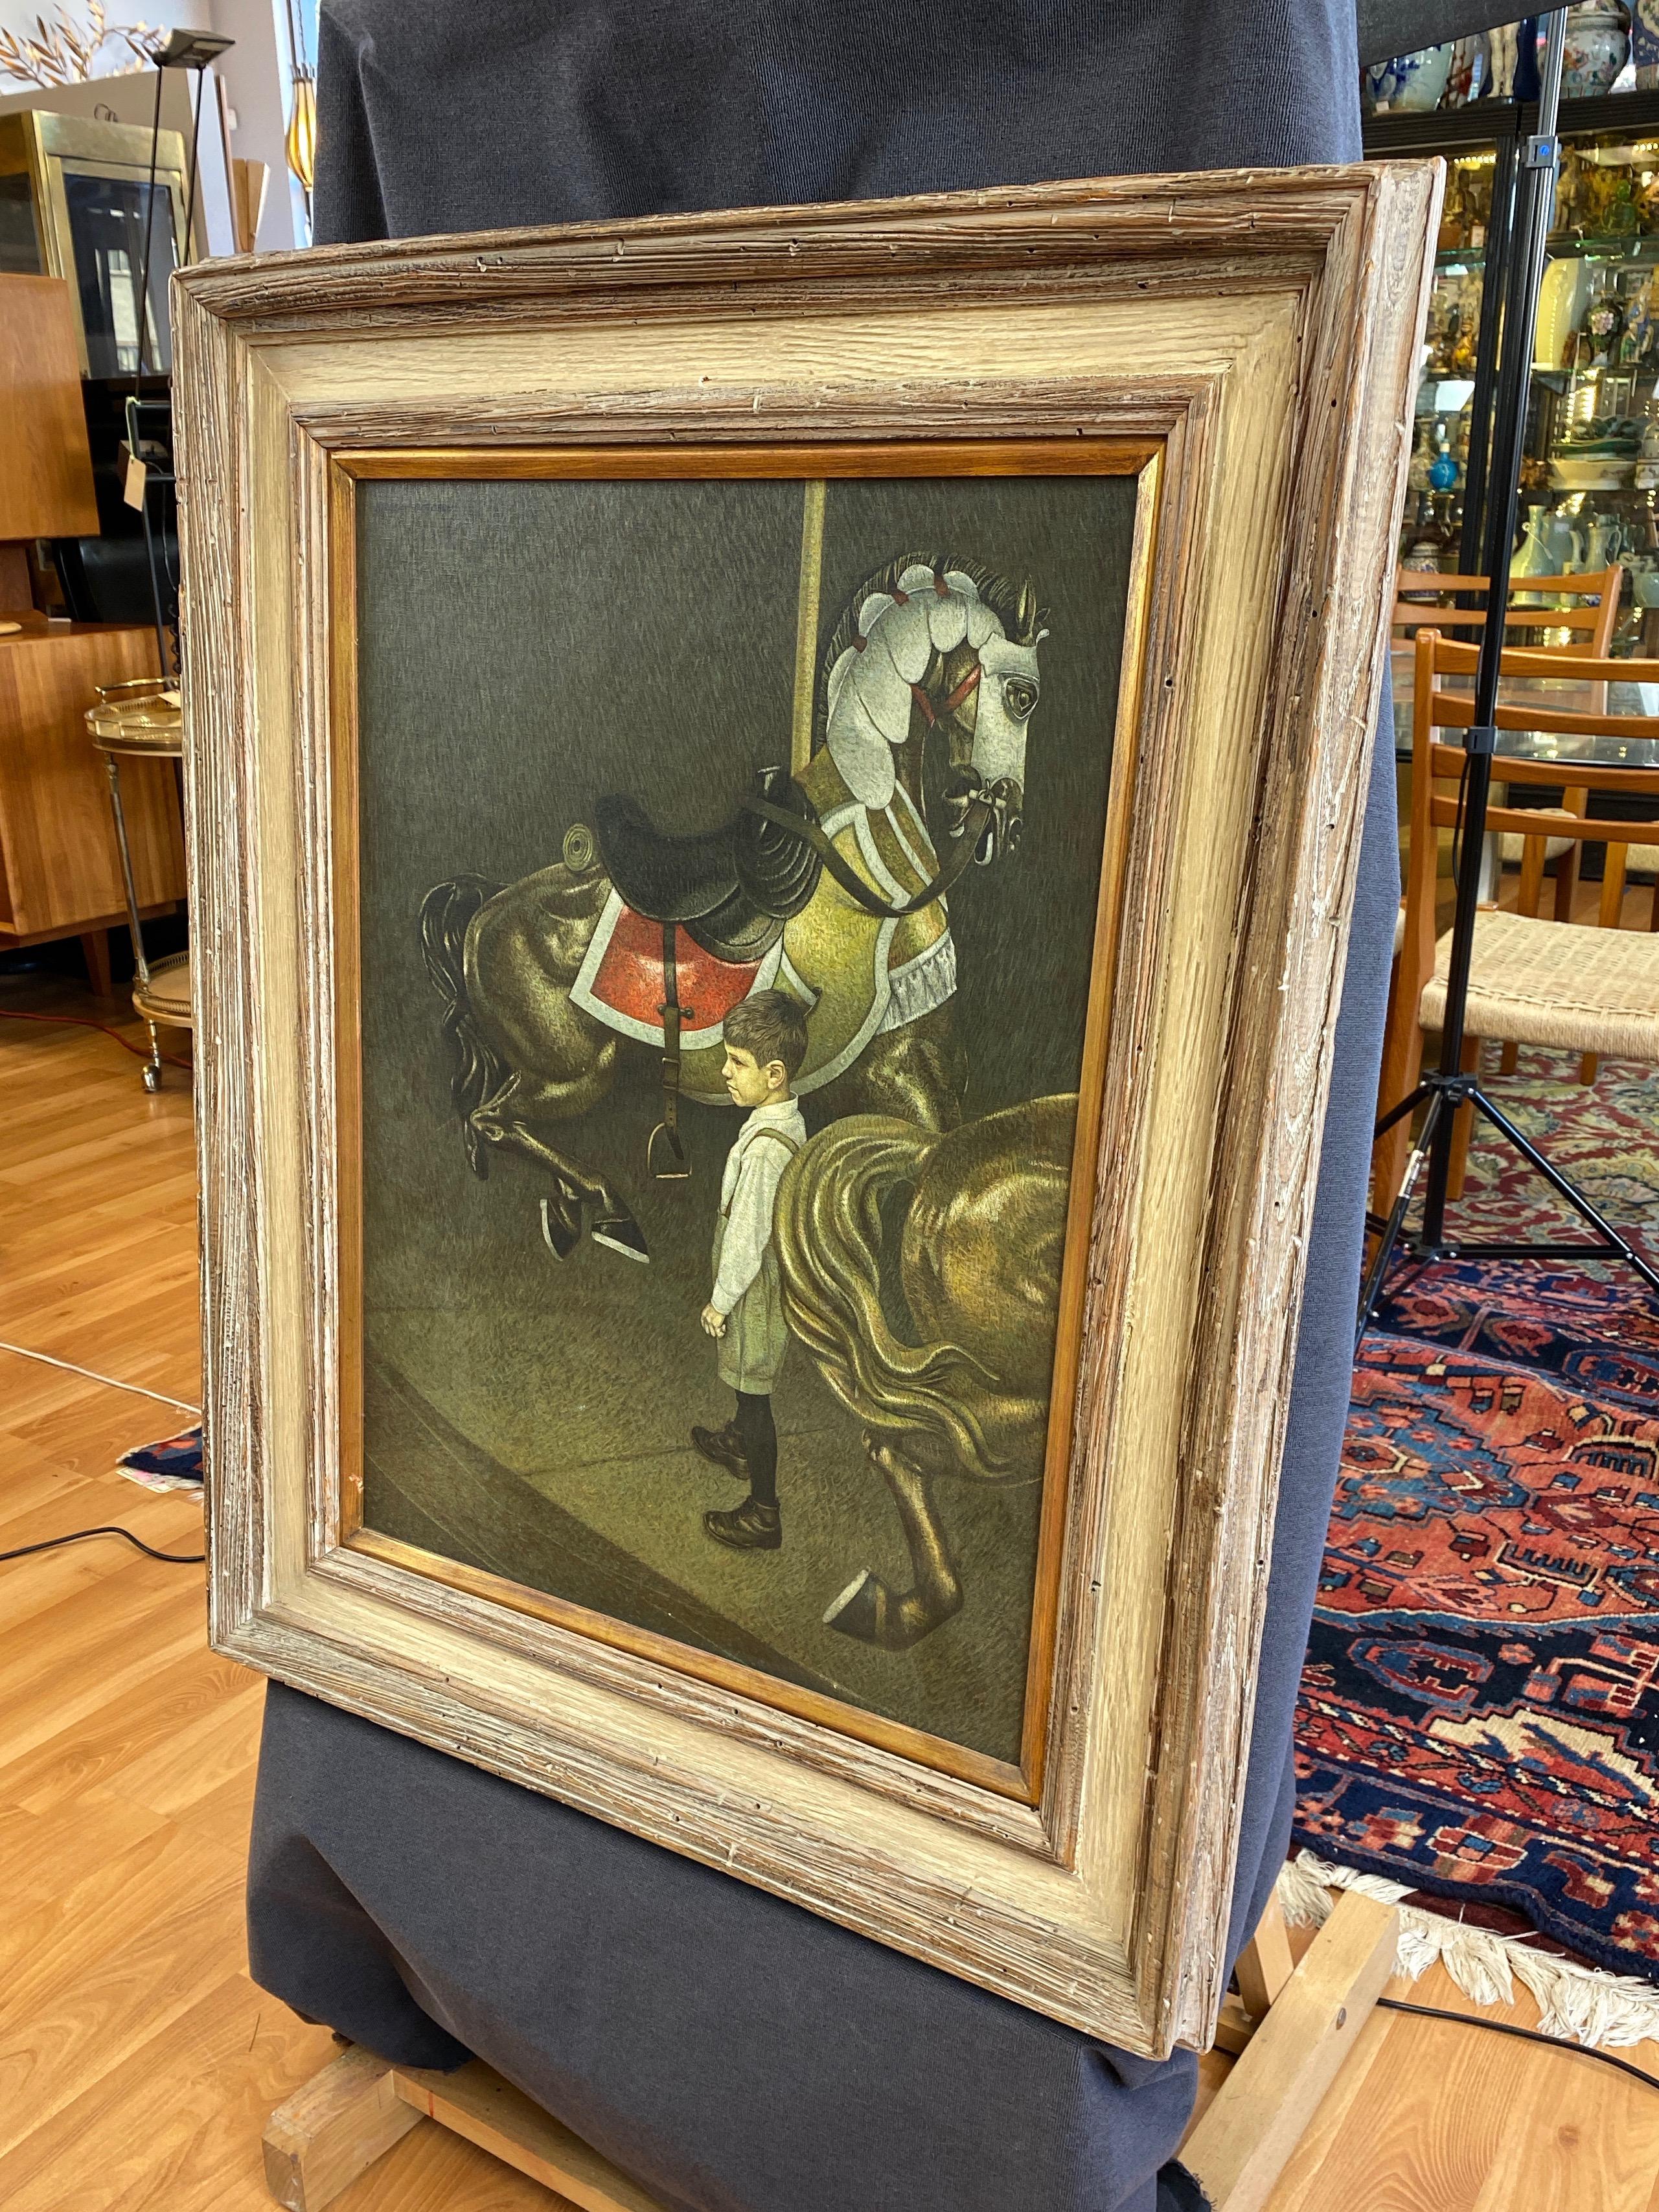 Herbert Laurence Davidson “Young Boy on Carousel”, Oil Painting, 1960s For Sale 2